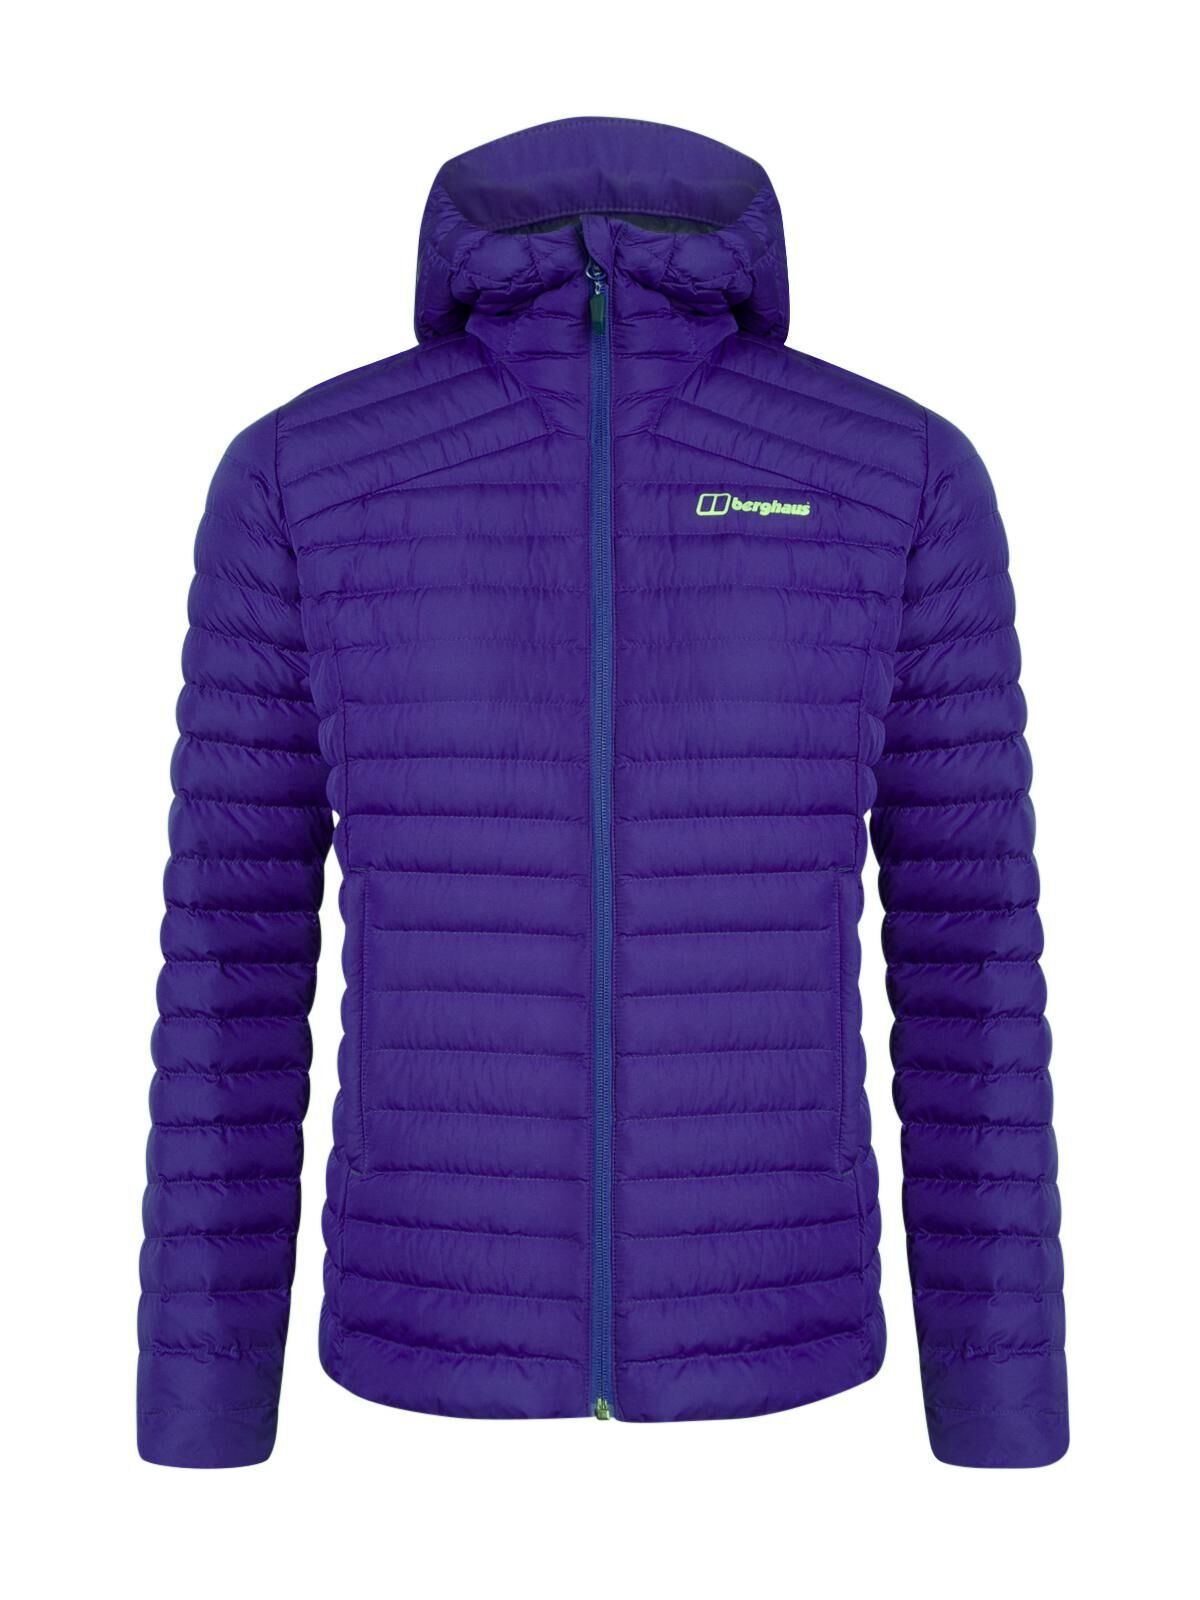 Berghaus Nula Micro Insulated Jacket - Giacca sintetica - Donna